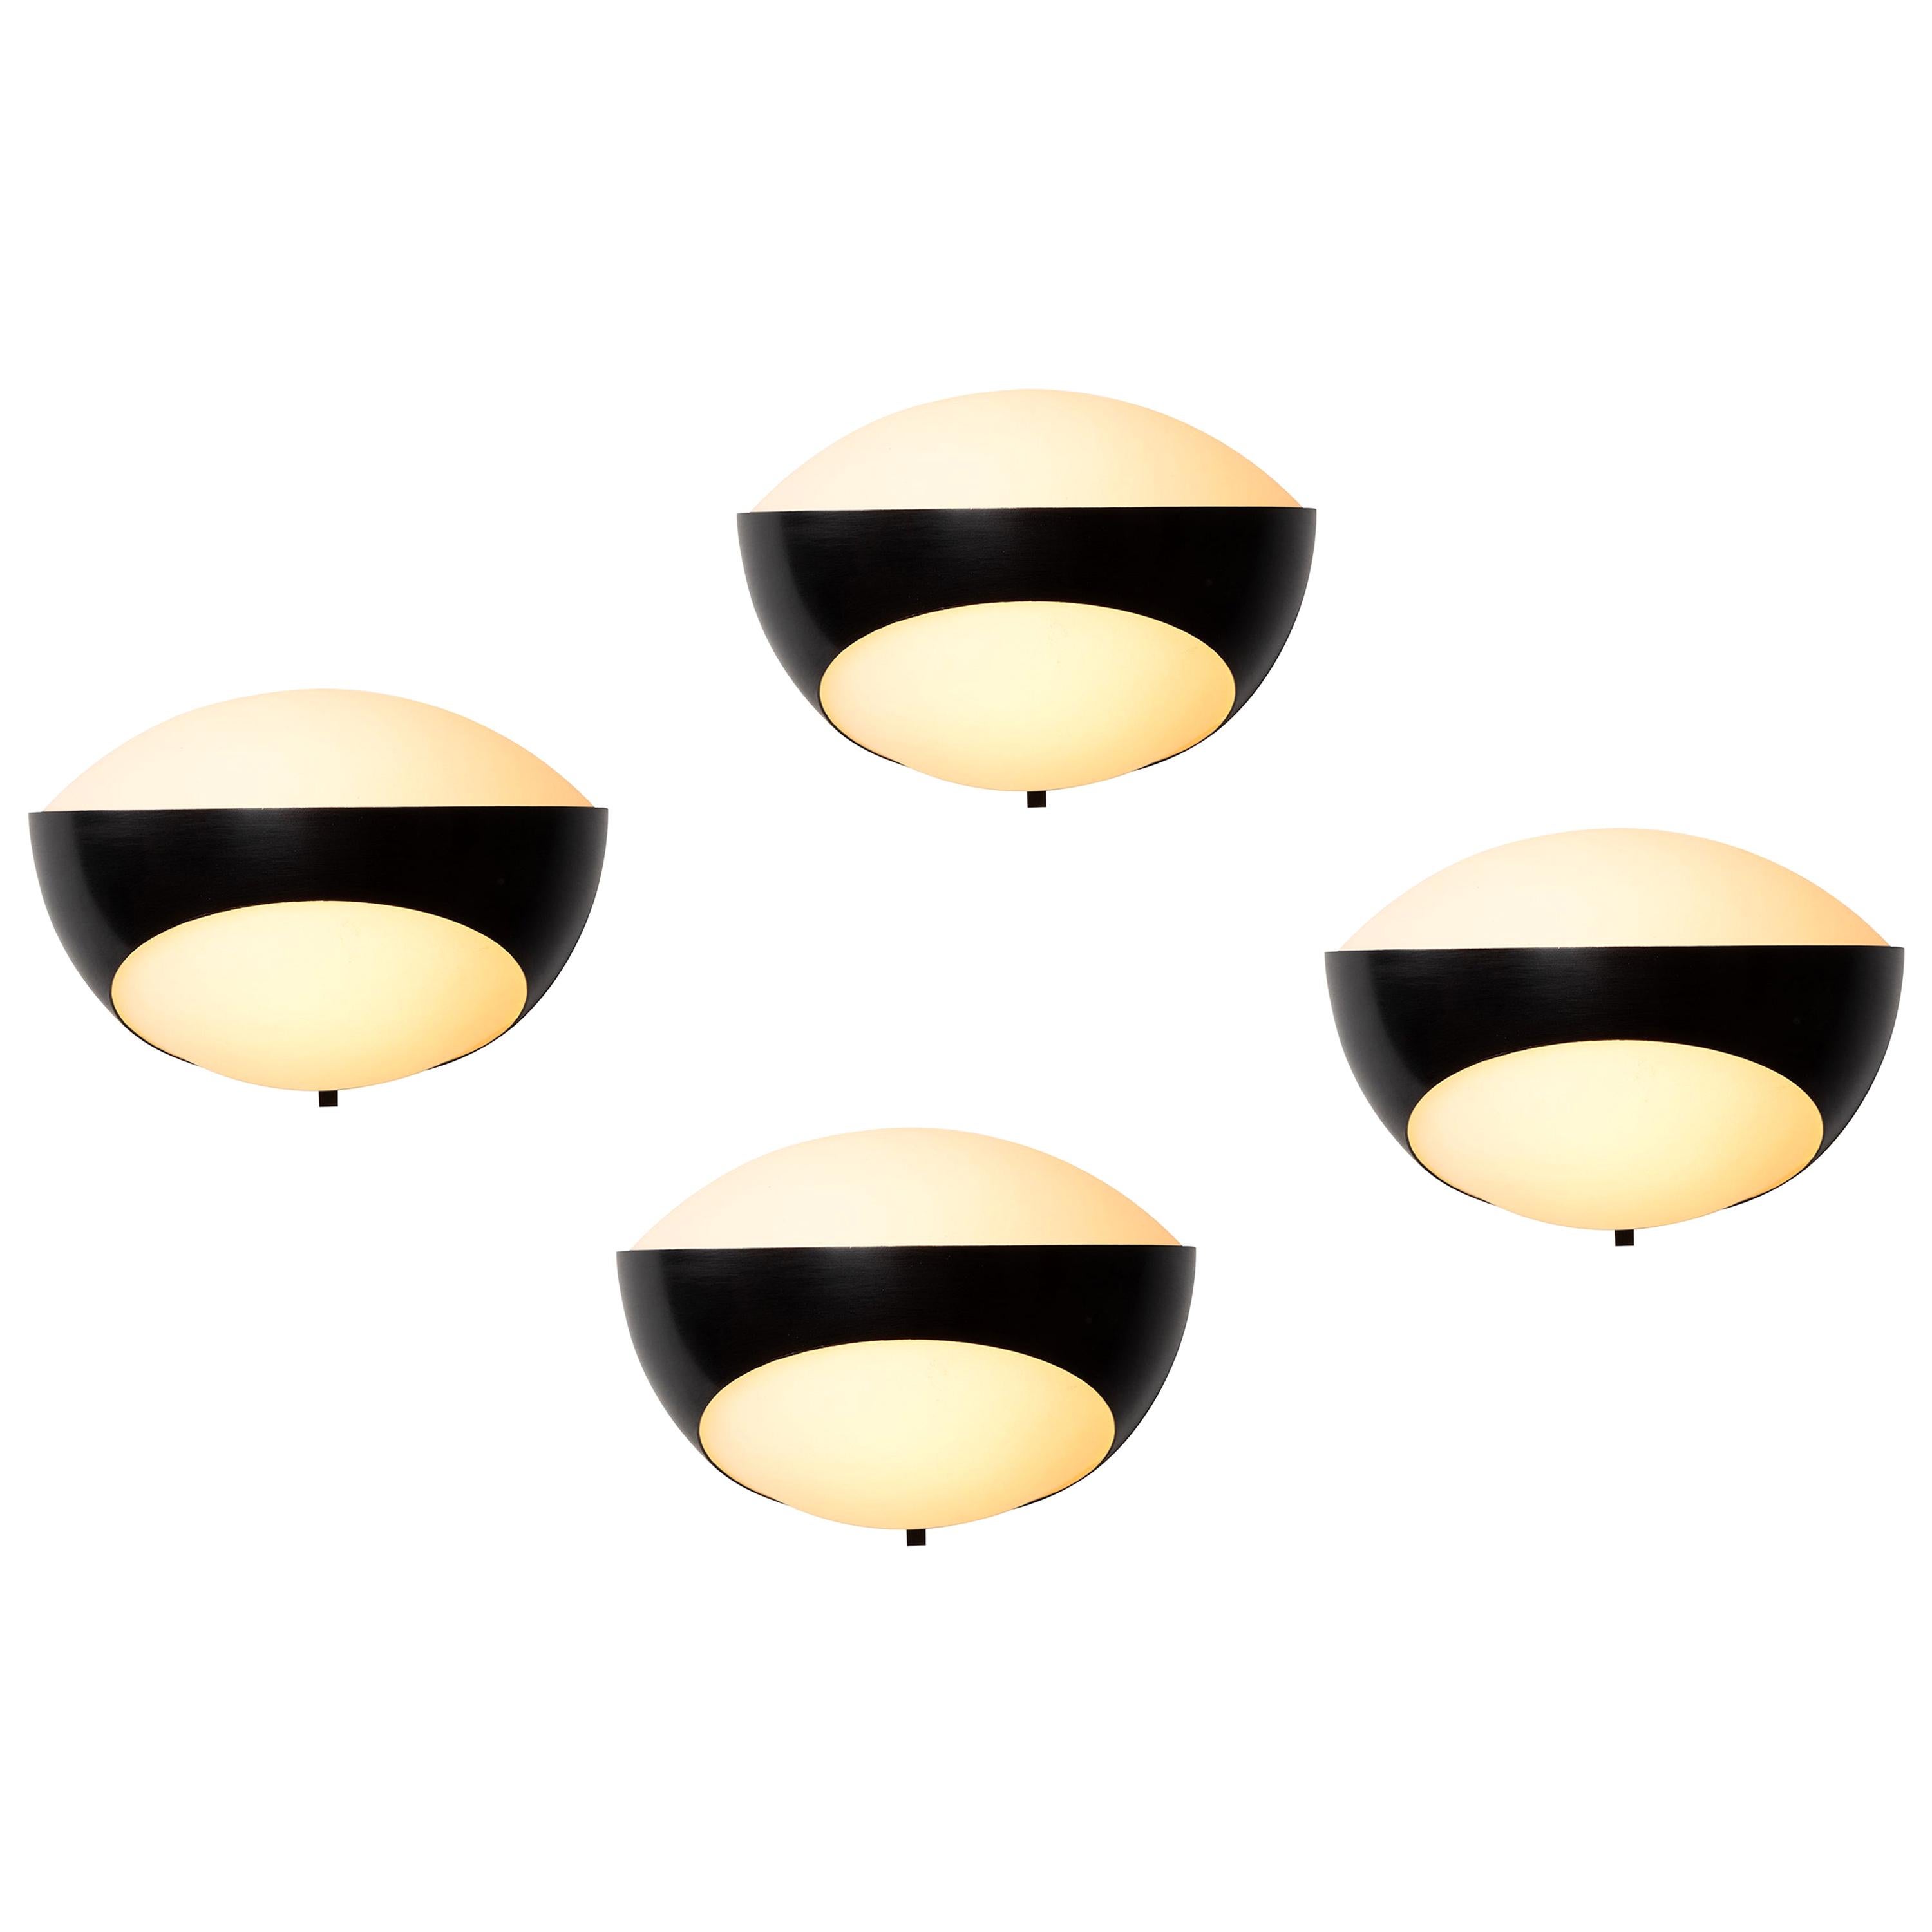 Rare 1960s Max Ingrand '1963' sconces for Fontana Arte. Executed in opaline glass, black painted metal and brass, Italy, circa 1960s. A highly sculptural design by one of the greatest masters of lighting, these exceptional sconces exude elegance and